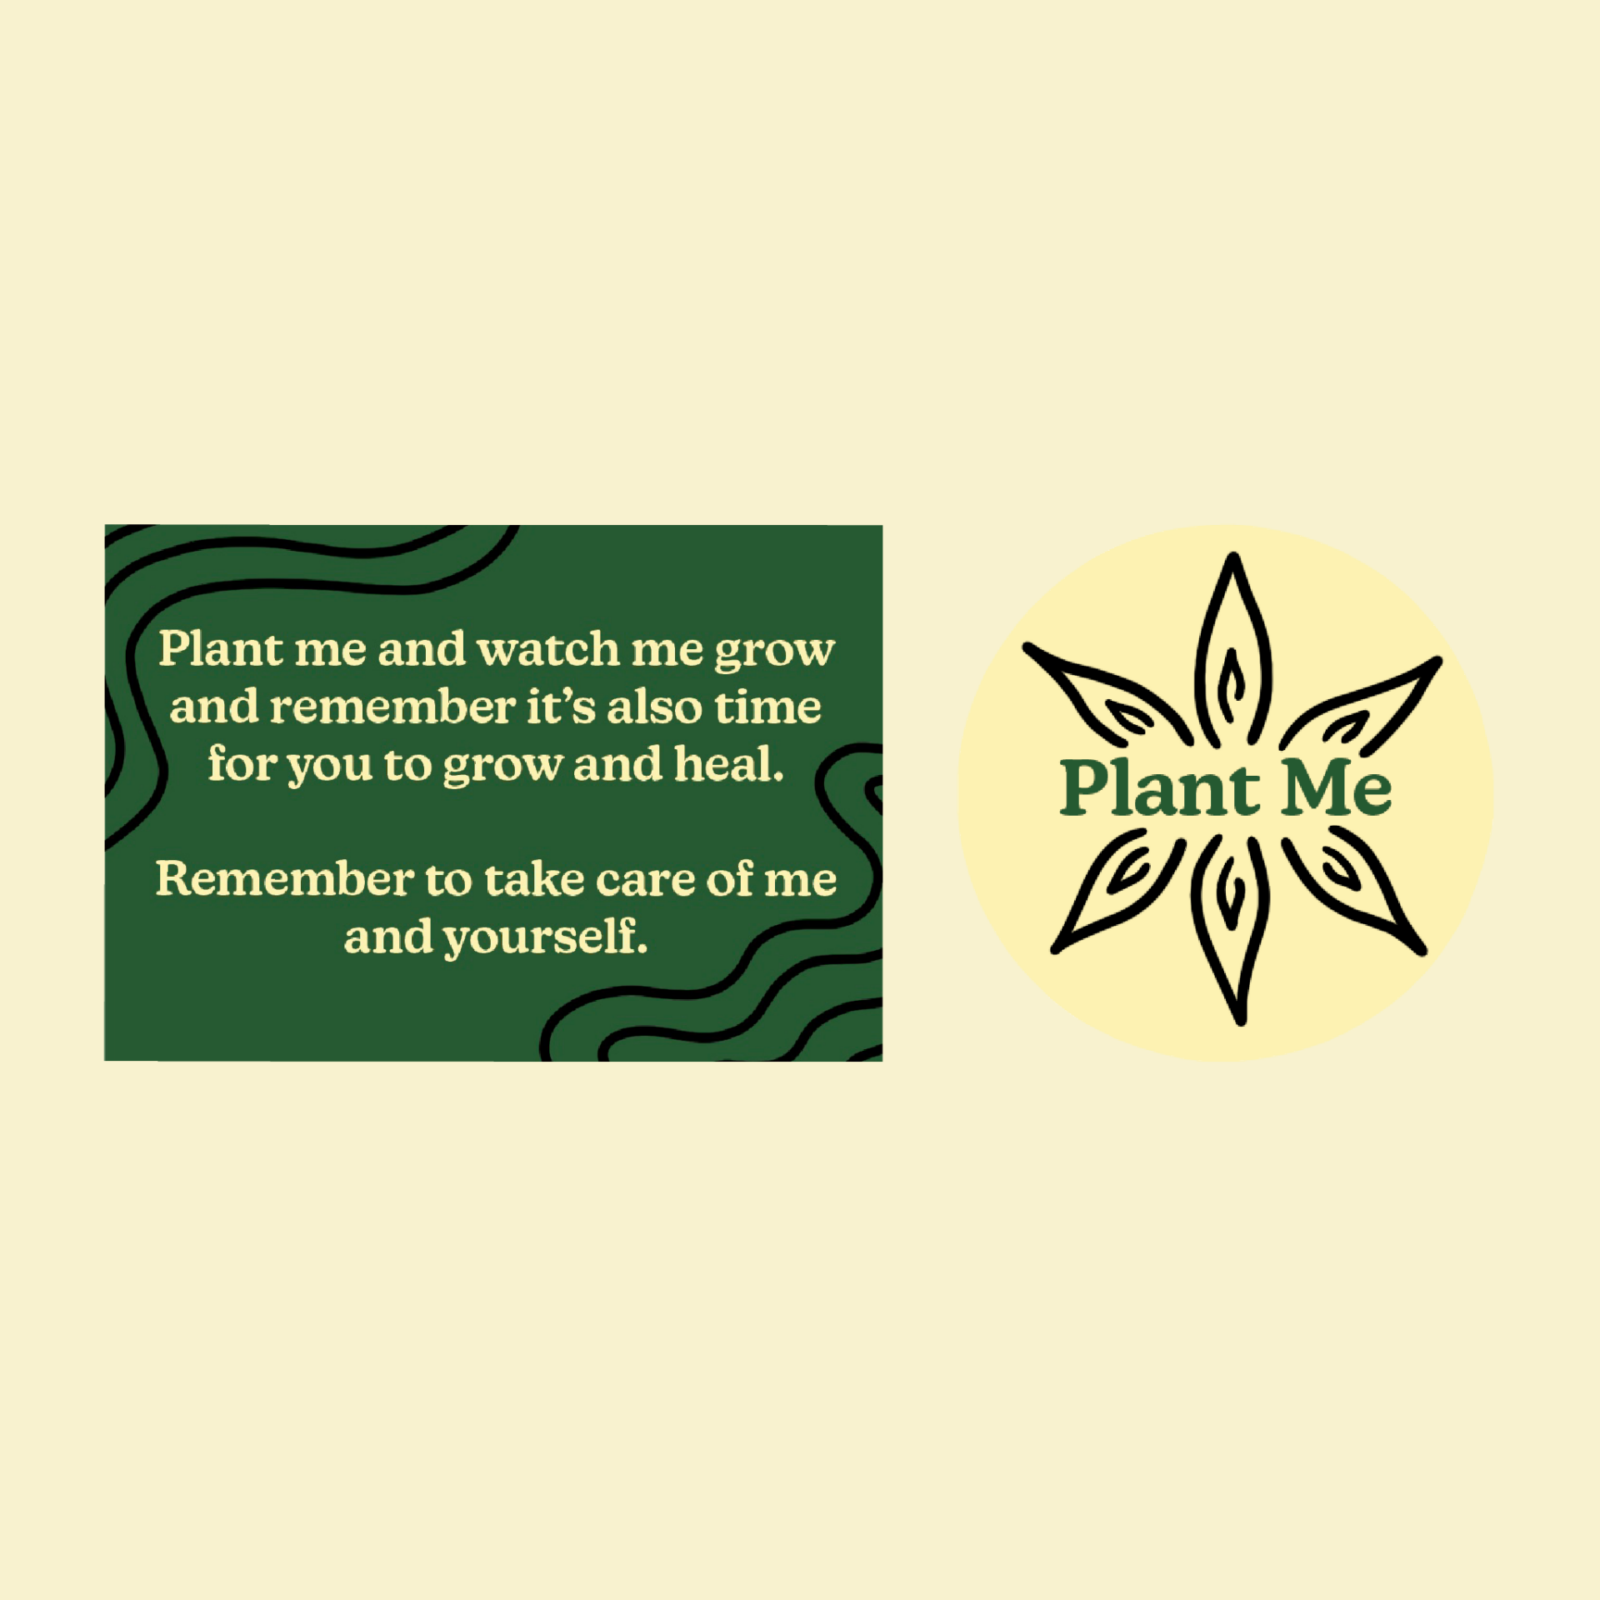 A packet of seeds the user can plant and watch grow, along with a friendly card.